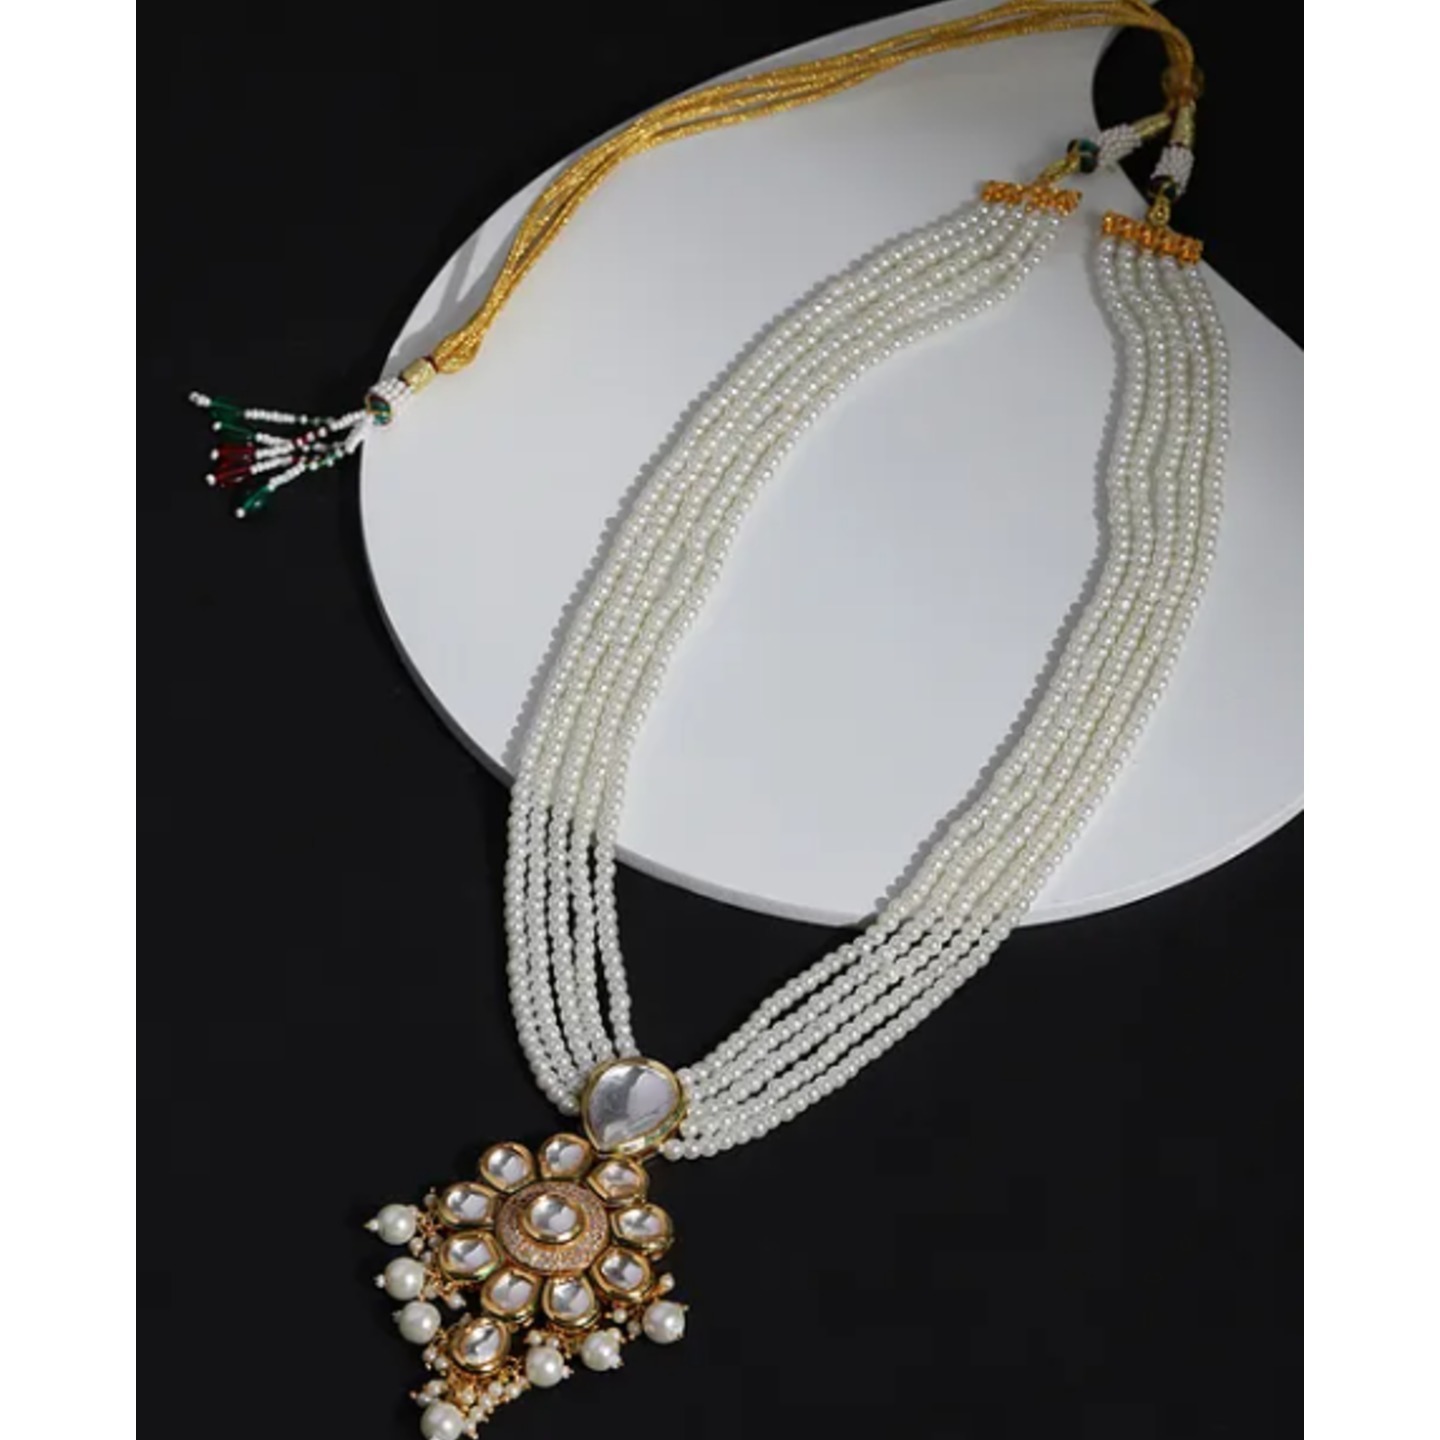 Gold Plated Kundan Beaded Necklace With Pearls